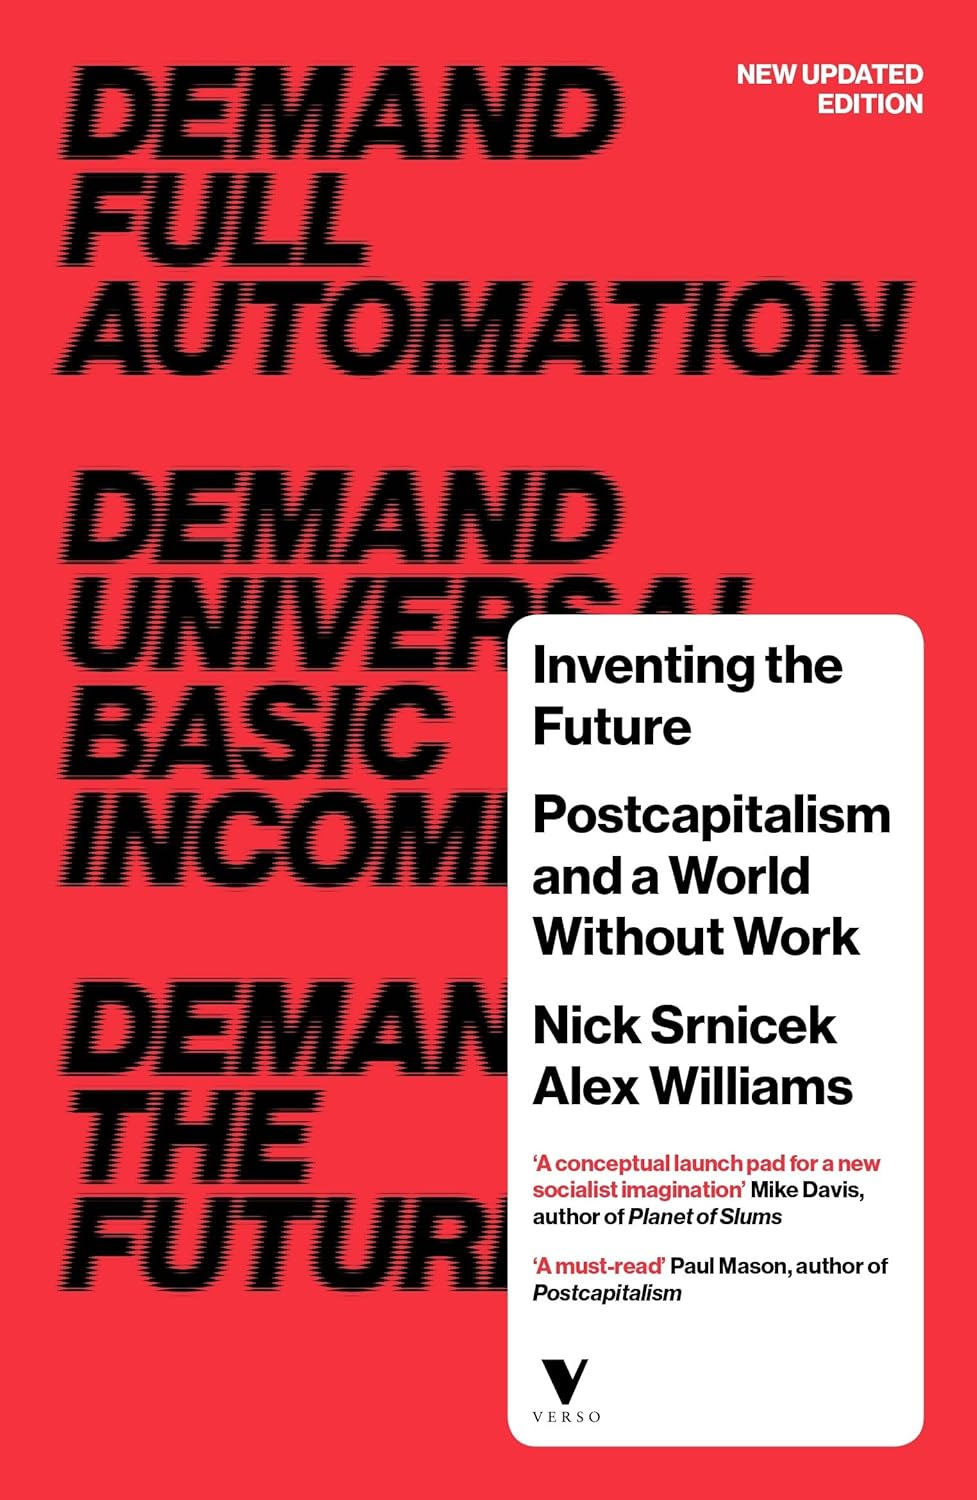 The cover of "inventing the future" is red and includes the logos "DEMAND FULL AUTOMATION," "DEMAND UNIVERSAL BASIC INCOME," AND "DEMAND THE FUTURE."